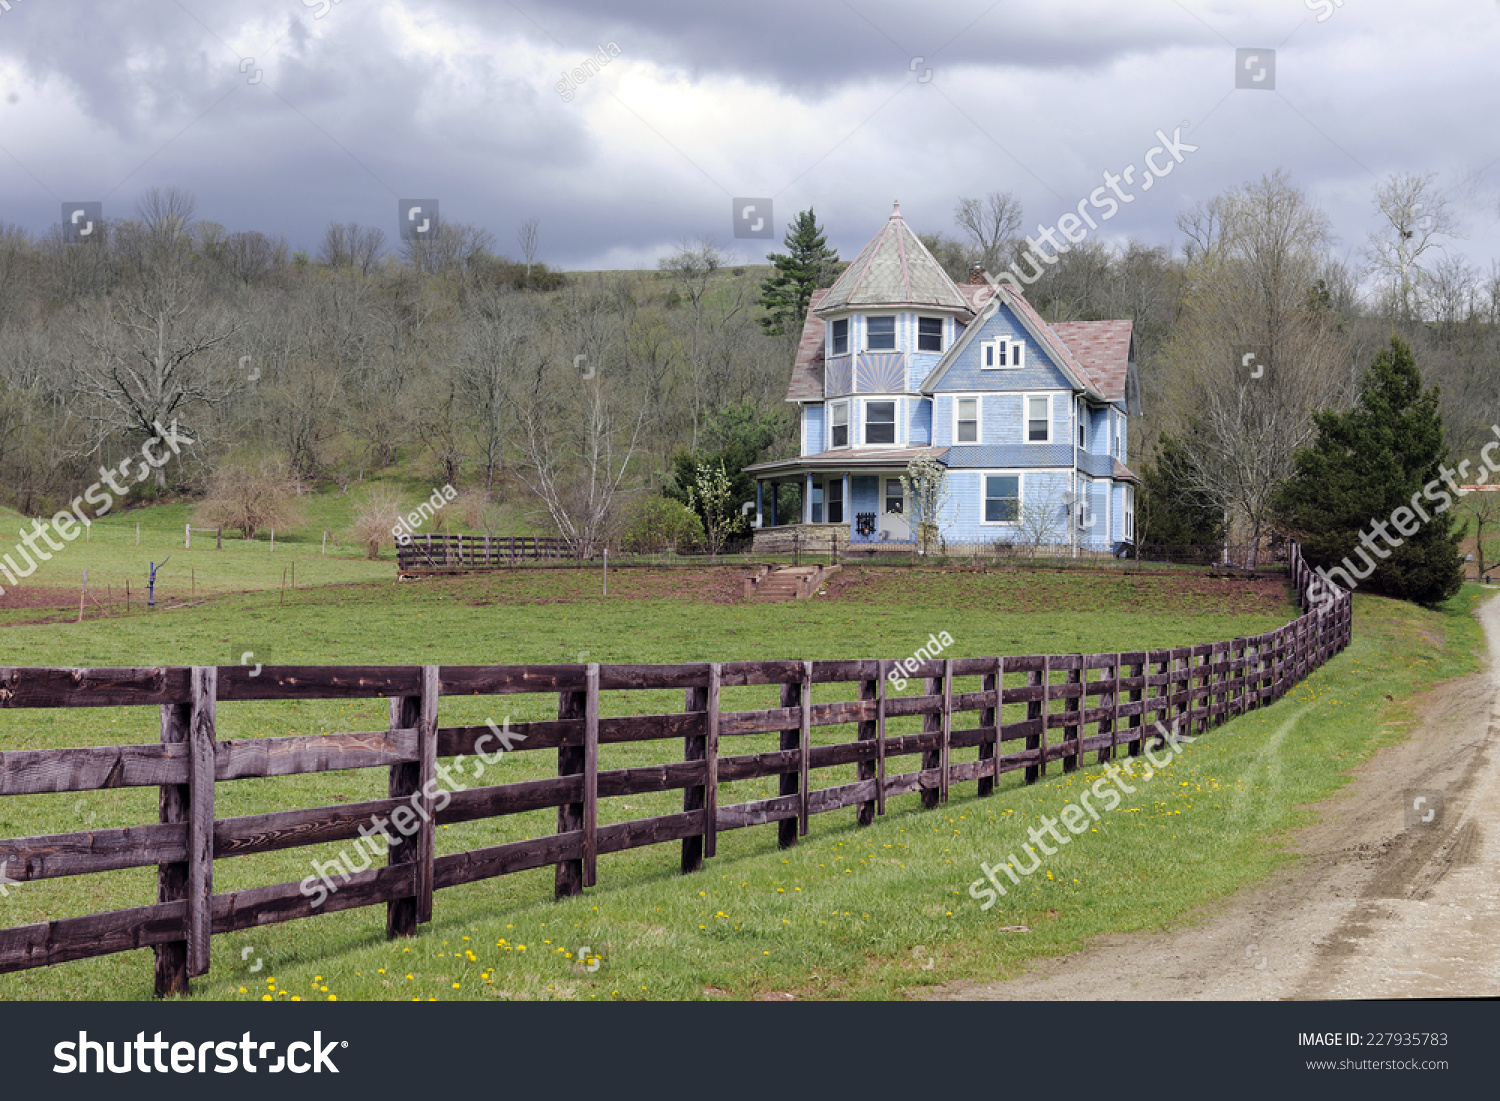 A rustic fence and dirt road by an old Victorian home under an overcast sky in the early spring.   #227935783